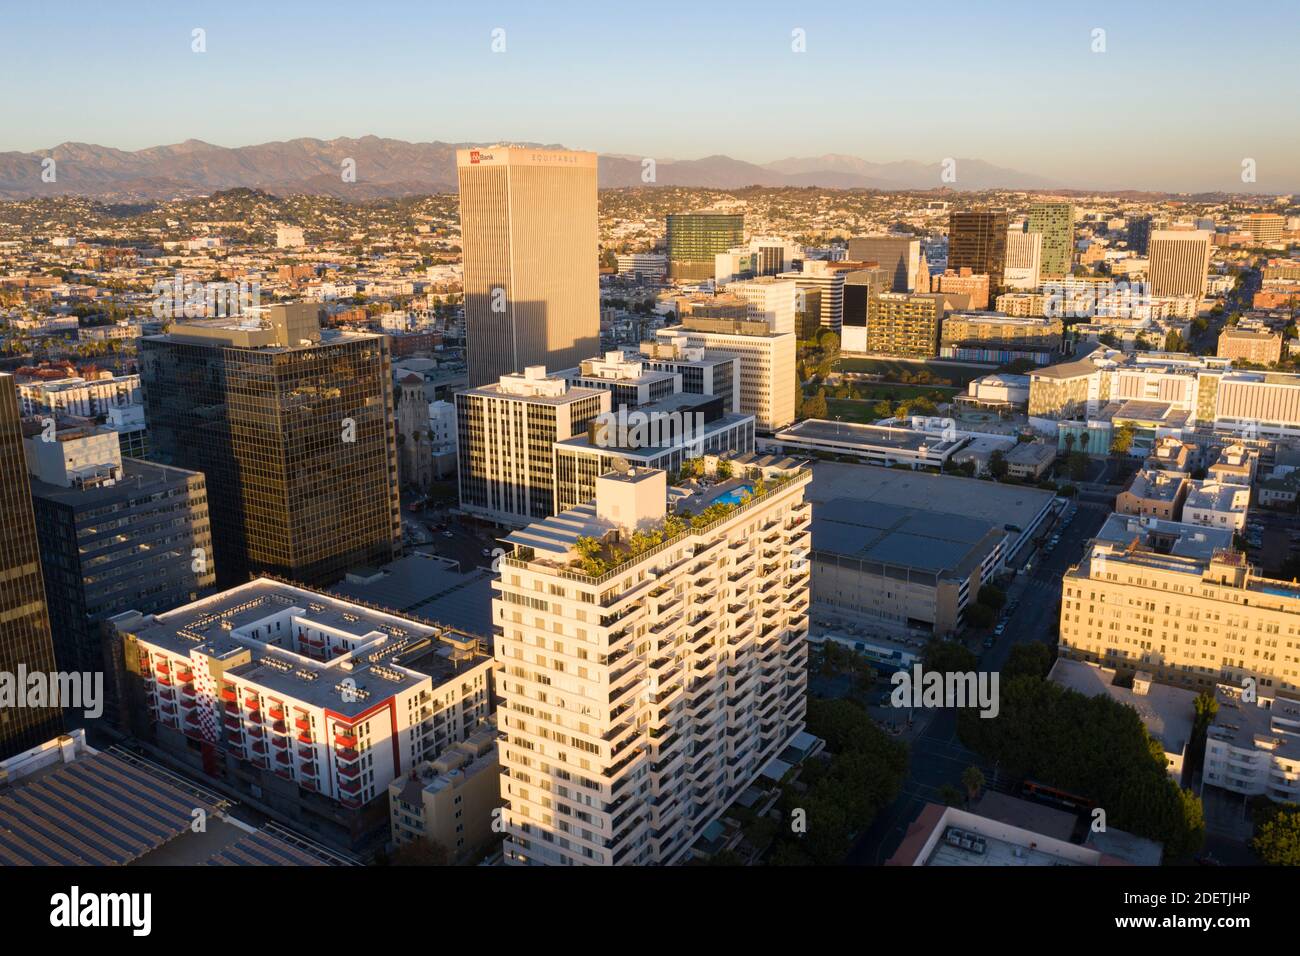 Aerial view above Koreatown and the dense urban Wilshire Boulevard corridor in central Los Angeles, California Stock Photo